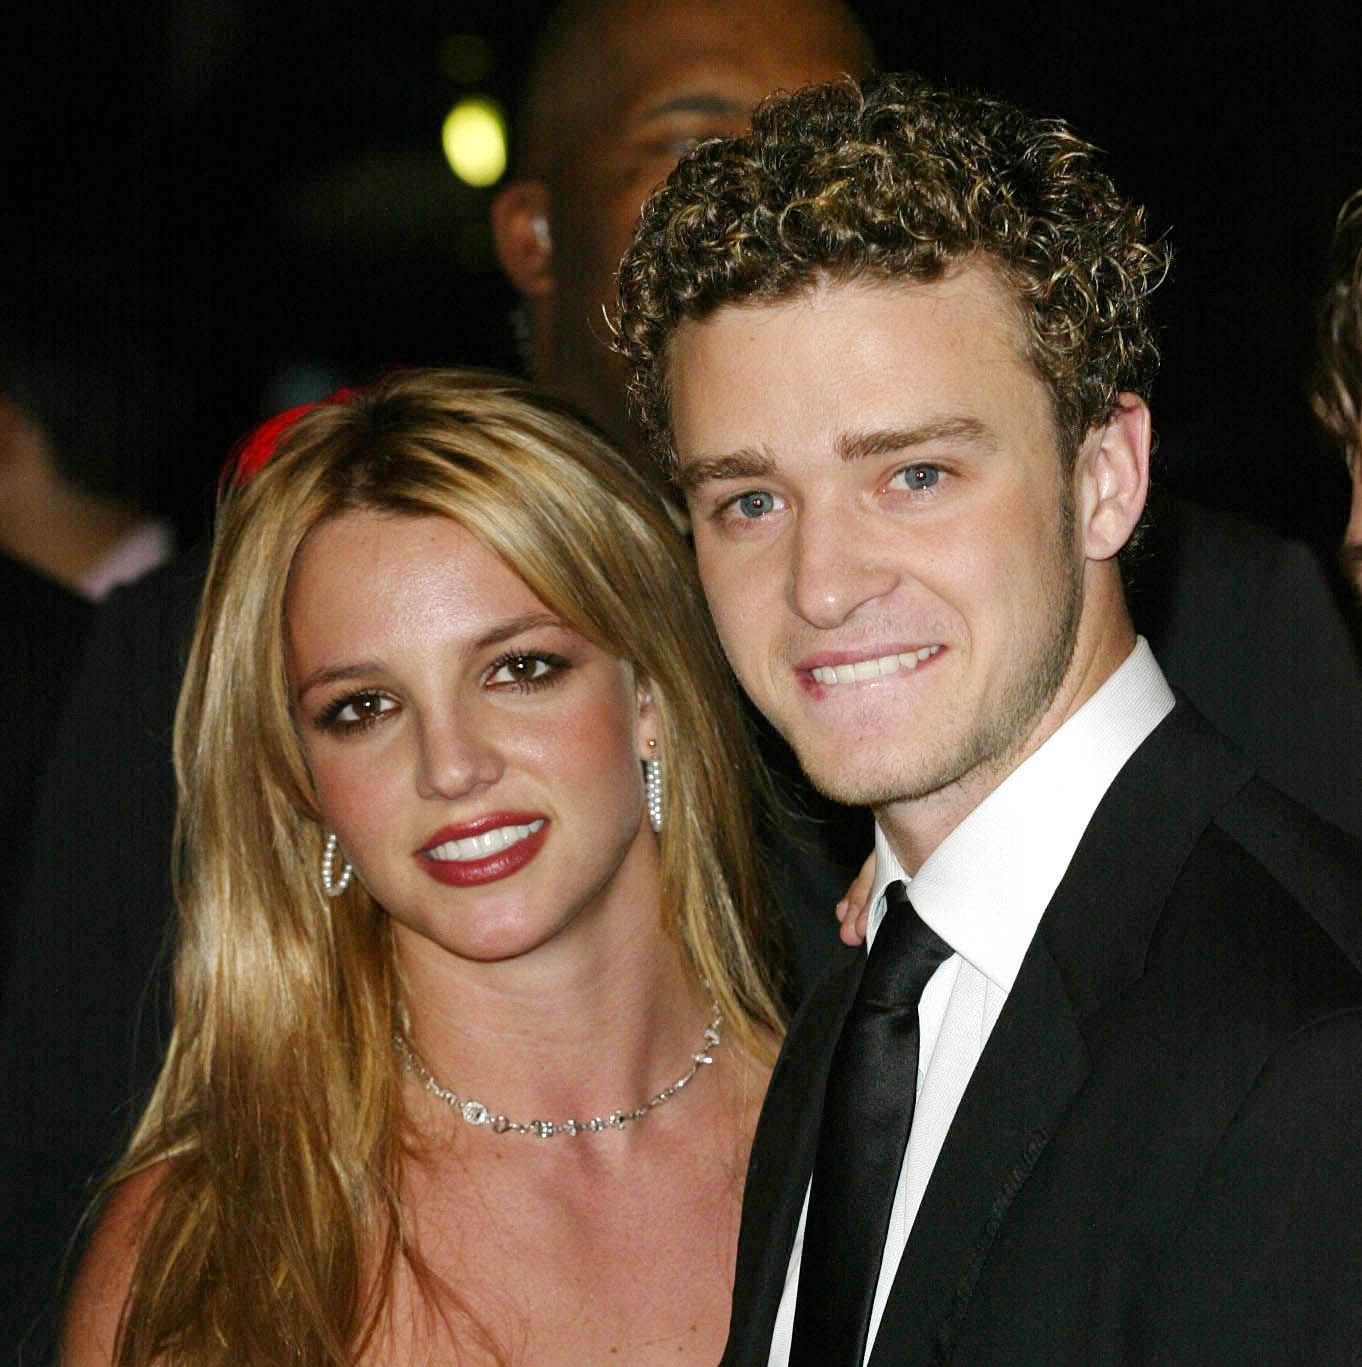 A source shared how Timberlake feels after Spears revealed she had an abortion while dating him in her memoir.